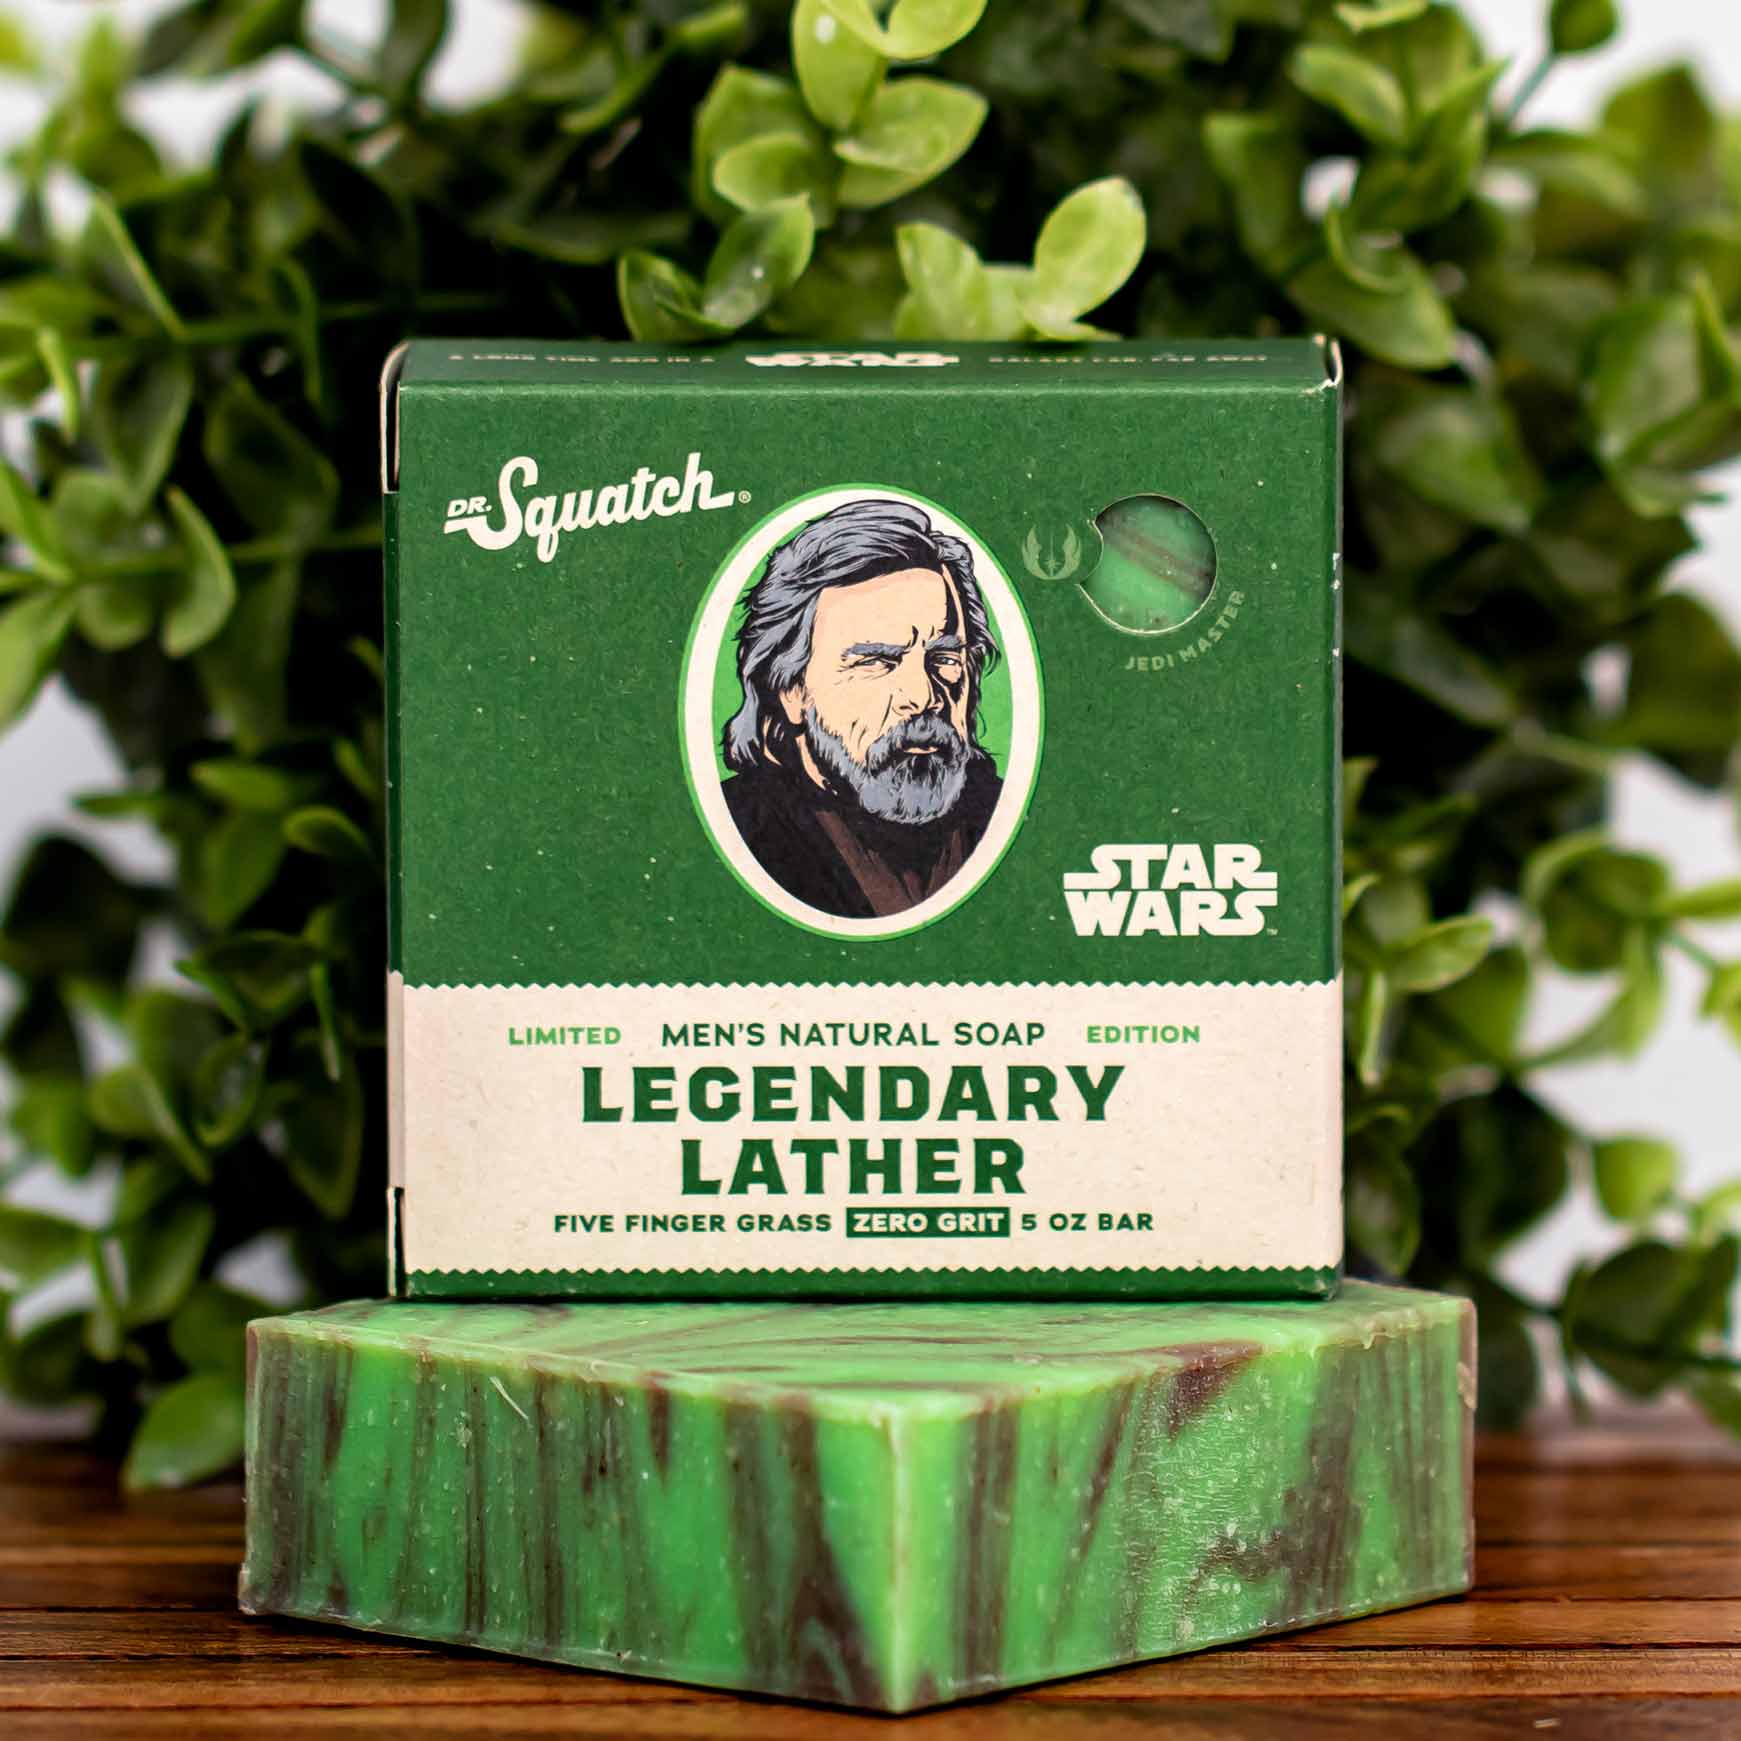 Dr. Squatch Star Wars Soap Collection has soap inspired by